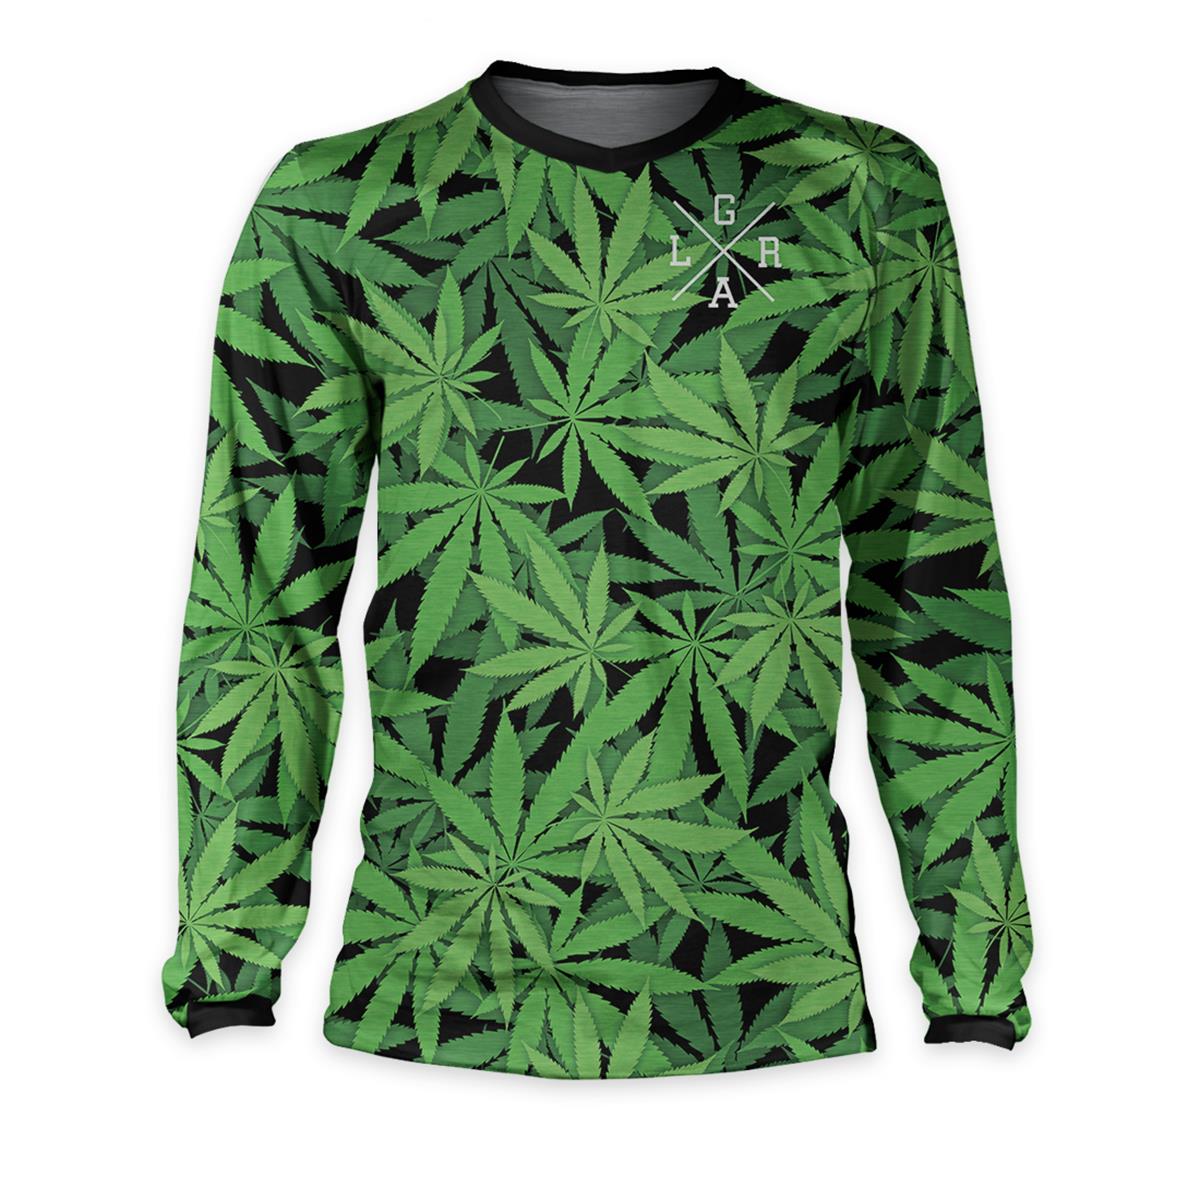 Loose Riders Downhill Jersey Long Sleeve Cult Of Shred 420 - Green/Black